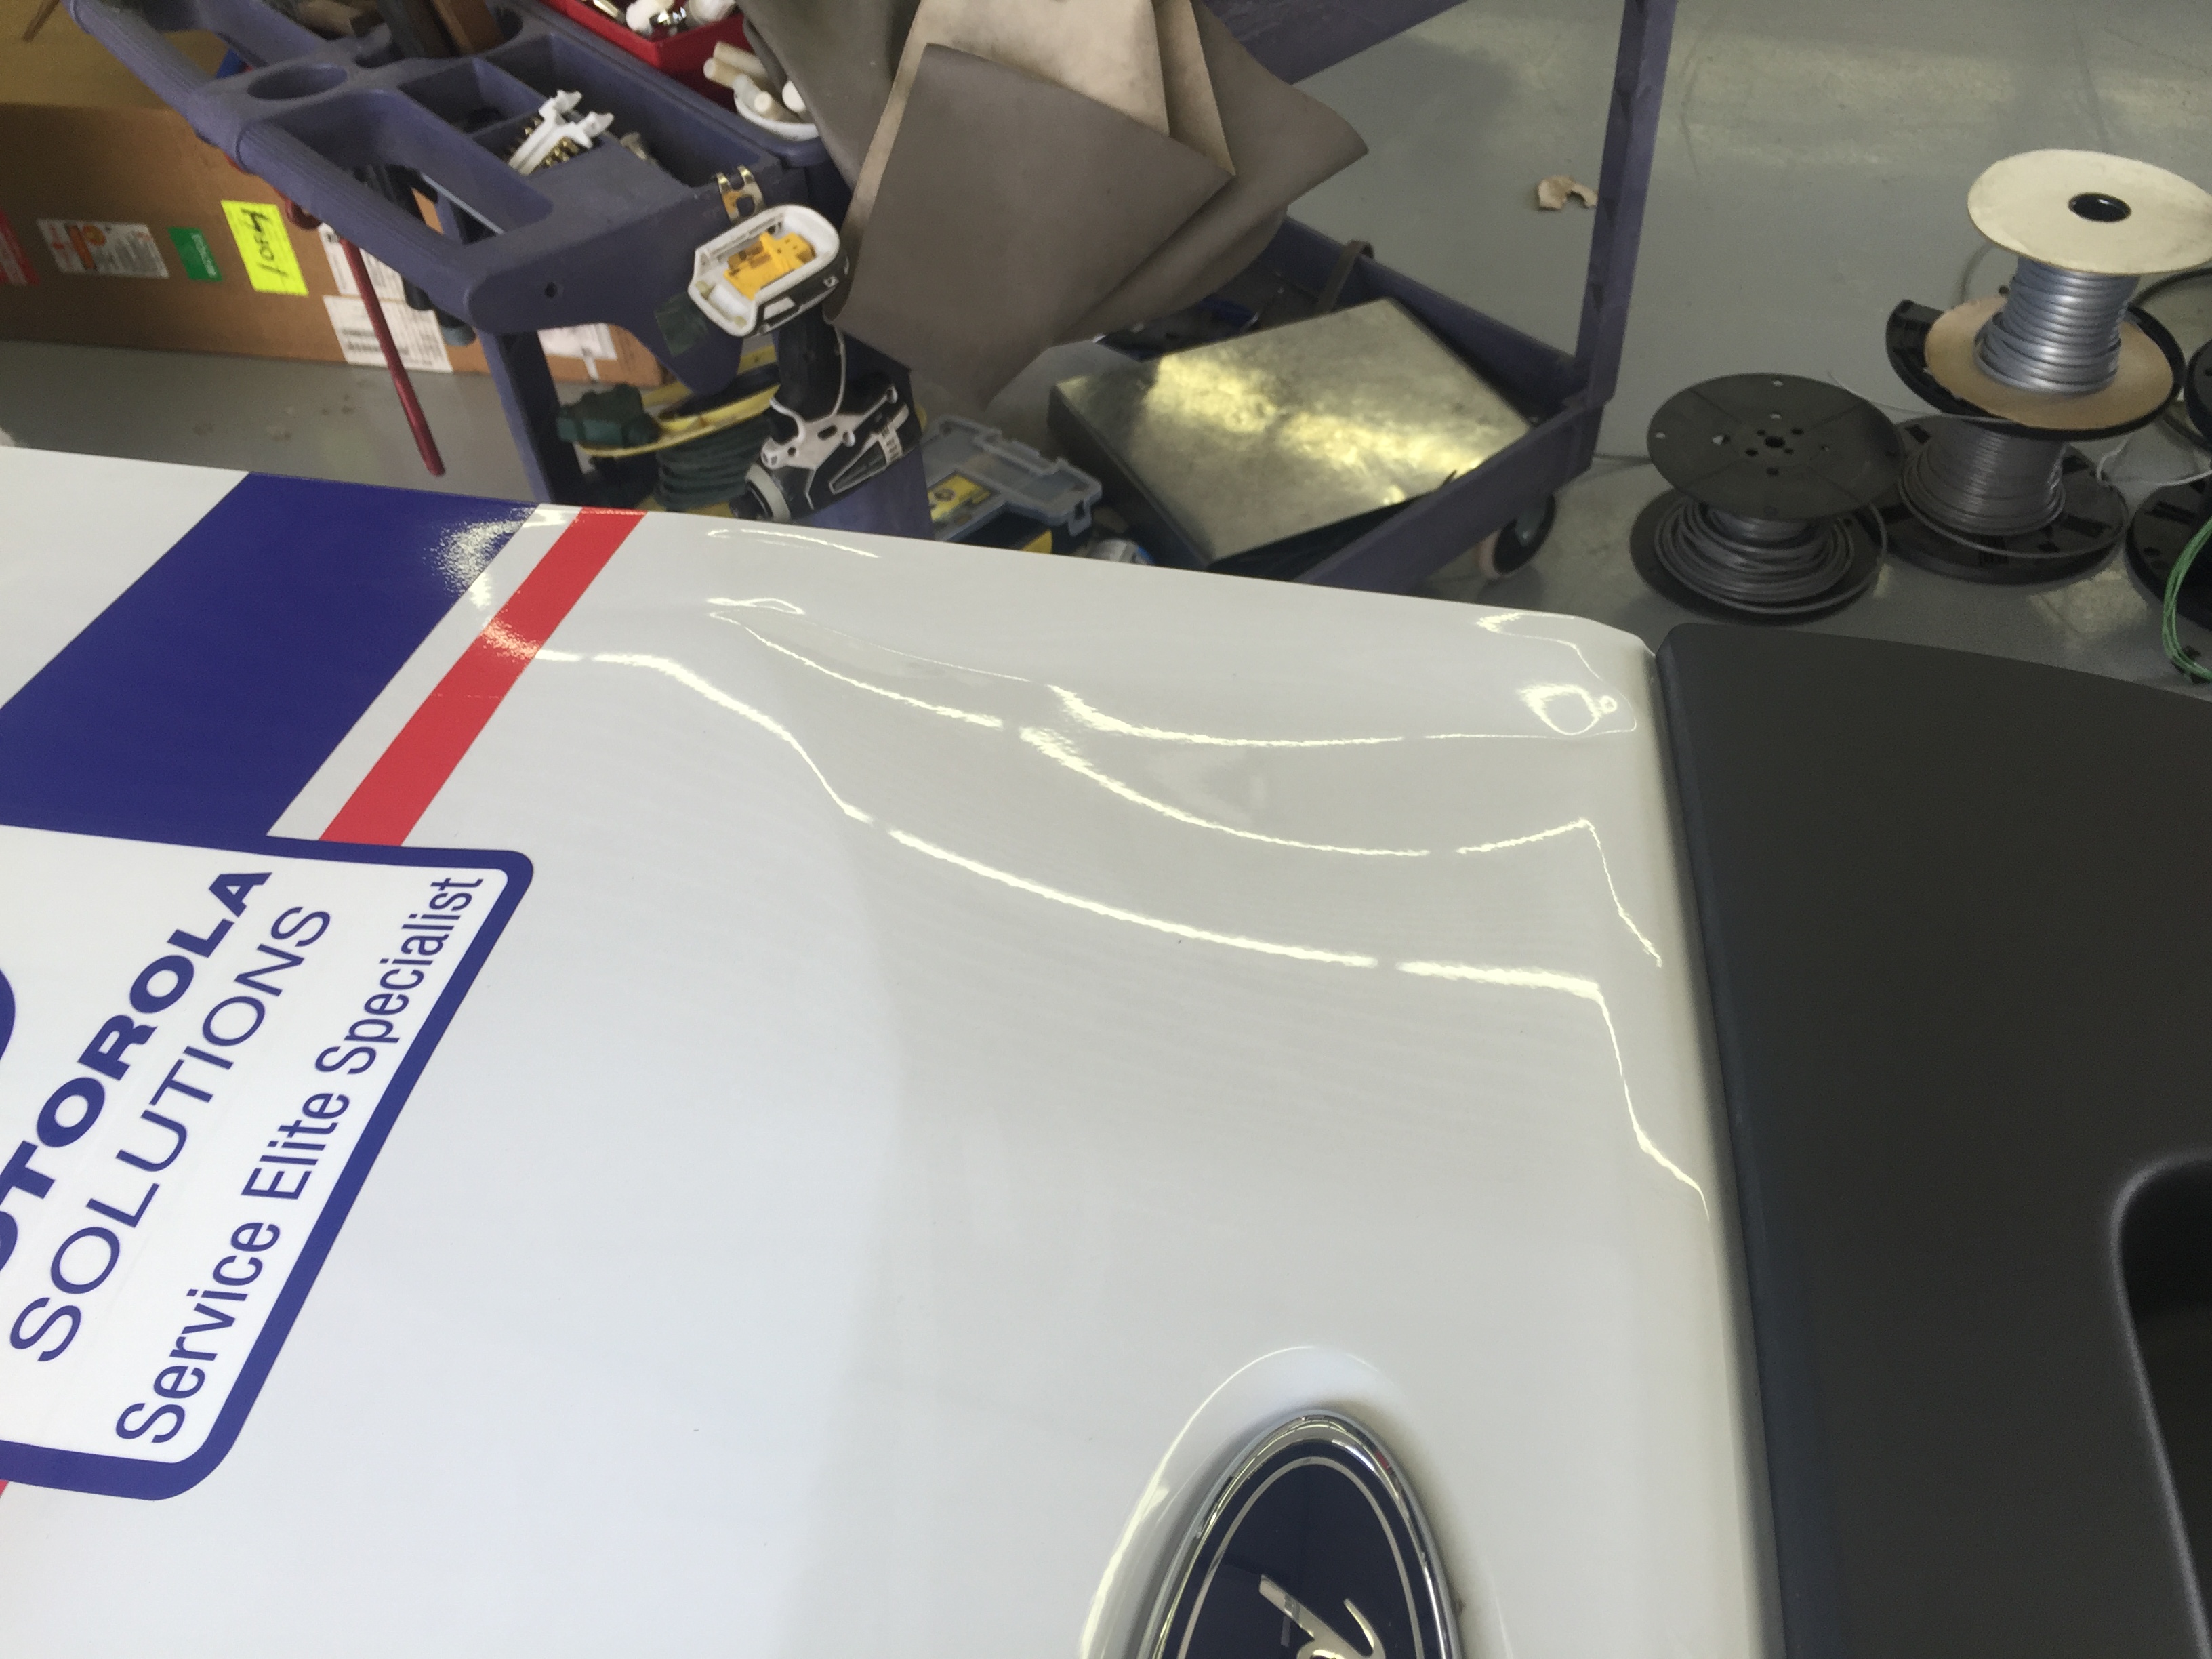 2016 Ford Transit Rear Door, Paintless dent removal, 217 Dent, http://217dent.com Springfield, IL Mobile Dent Repair. Dent Removal, Ding Removal, Springfield, IL